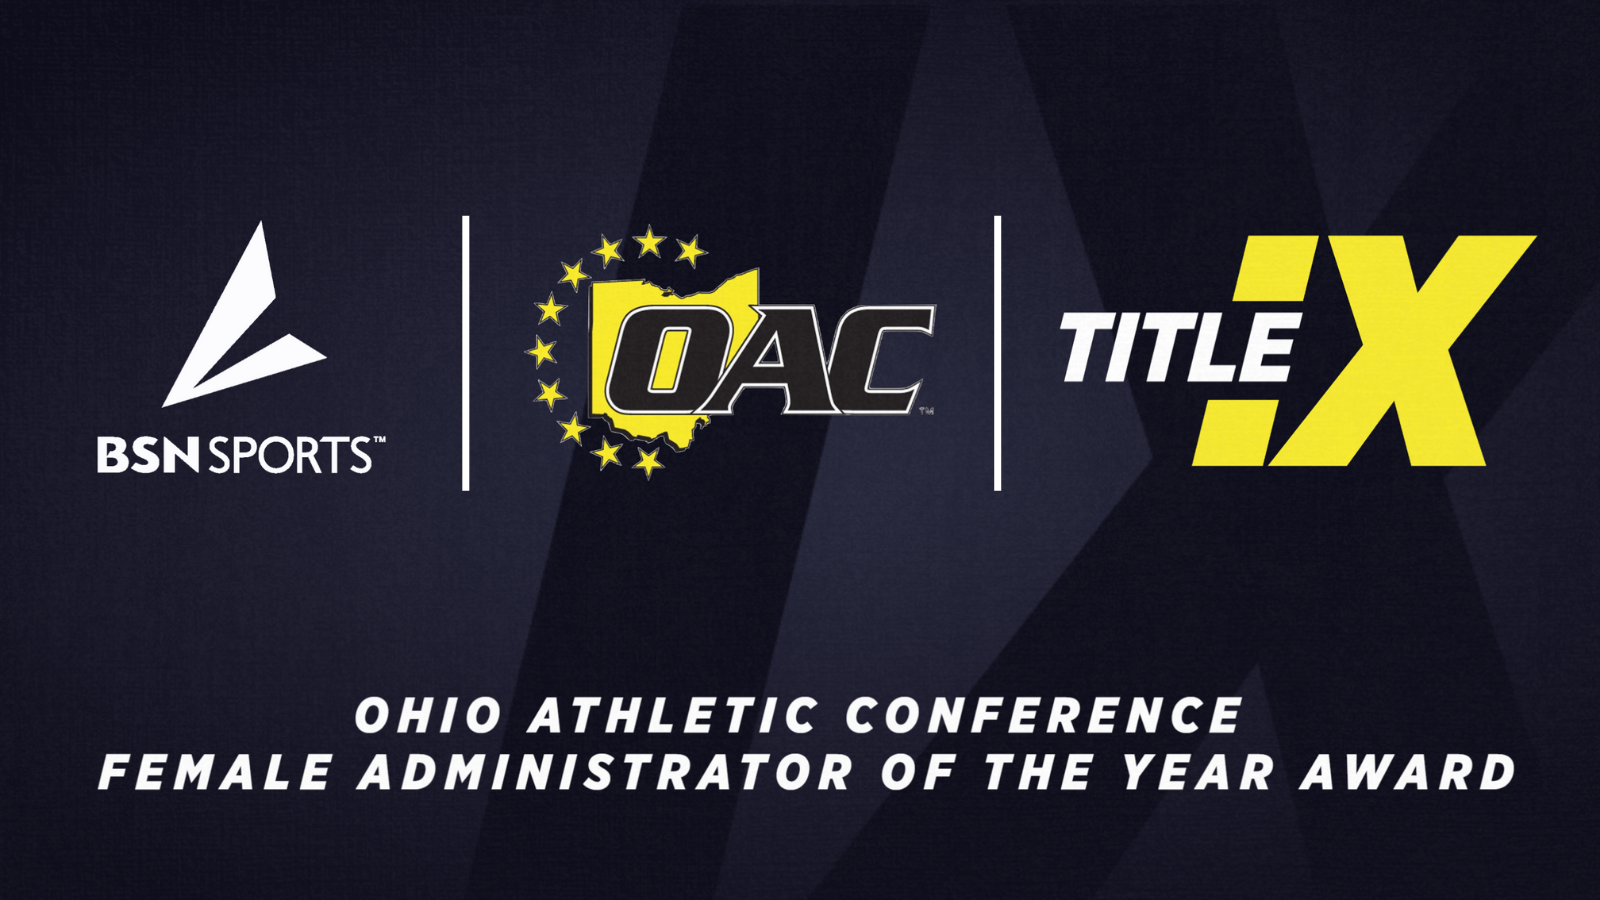 The OAC and BSN SPORTS have partnered to recognize an OAC Female Administrator of the Year